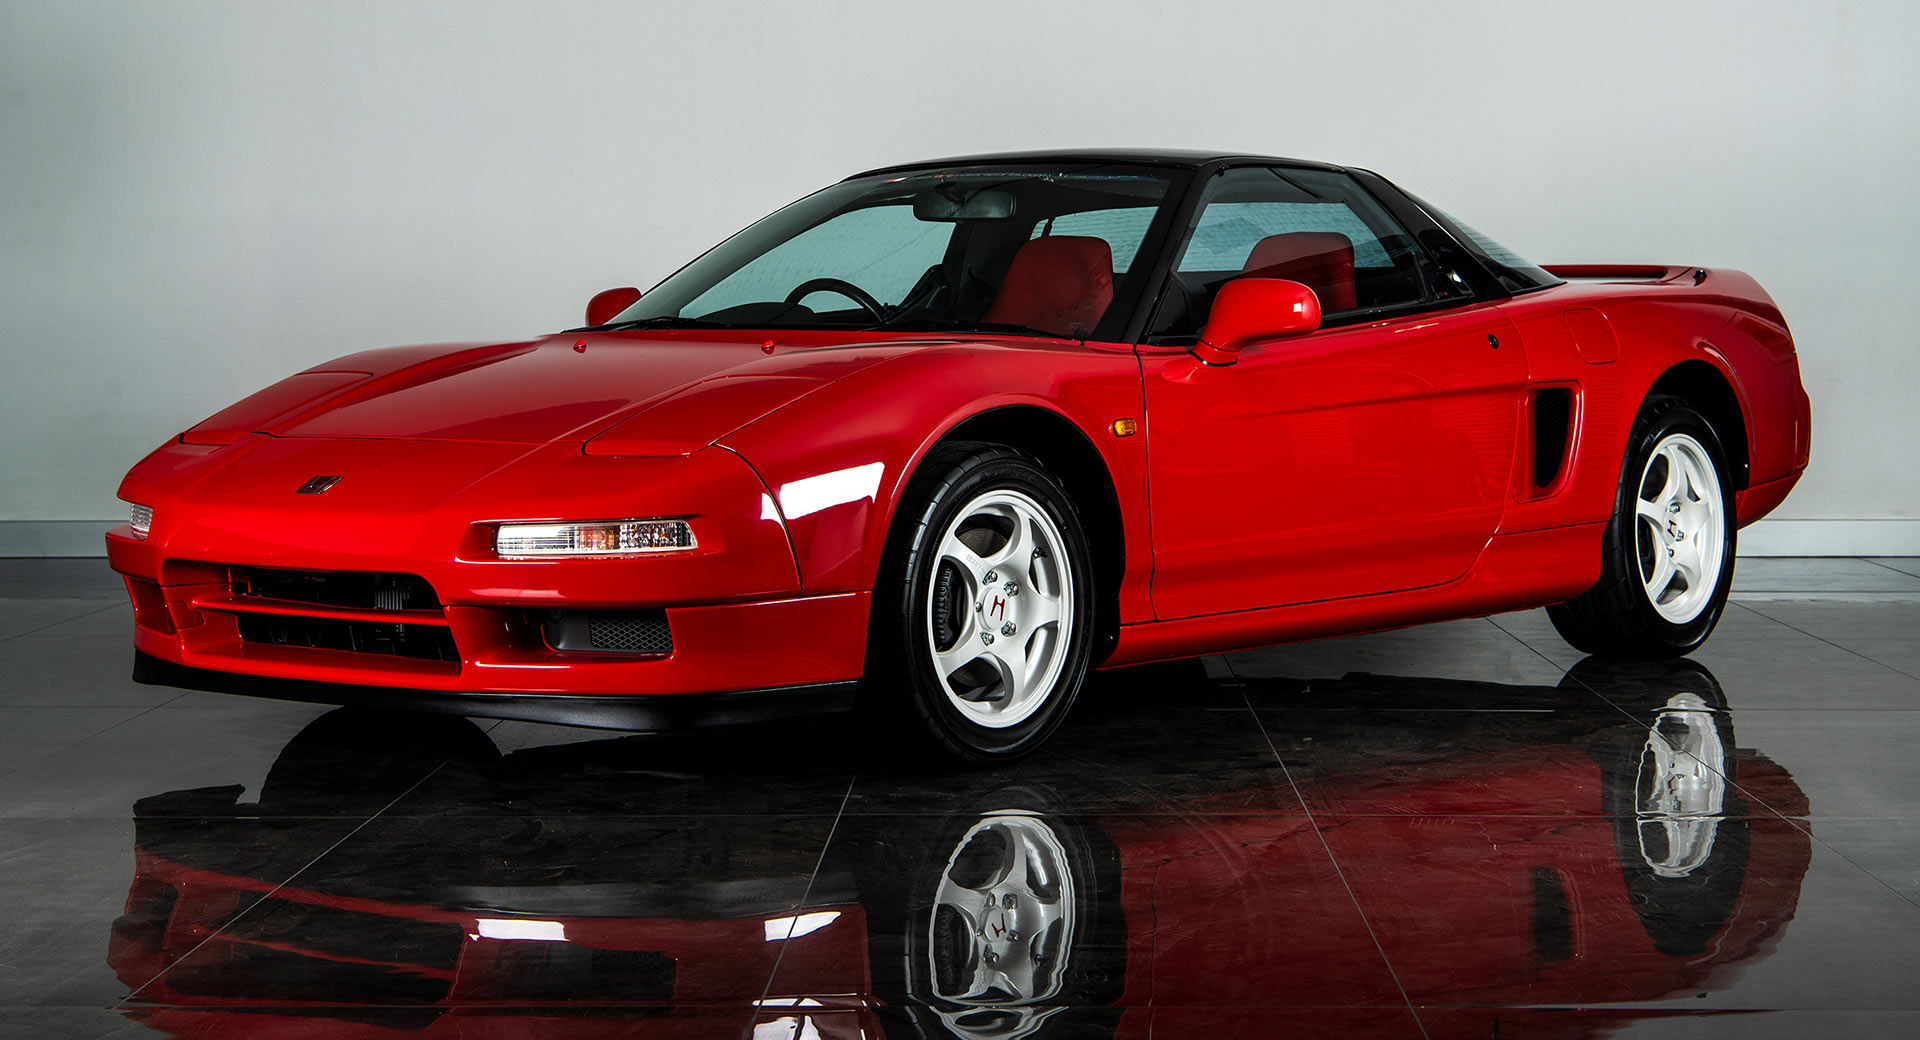 1993 Nsx Type R Is For The Hardcore Enthusiast Who Can Spend 285k Carscoops